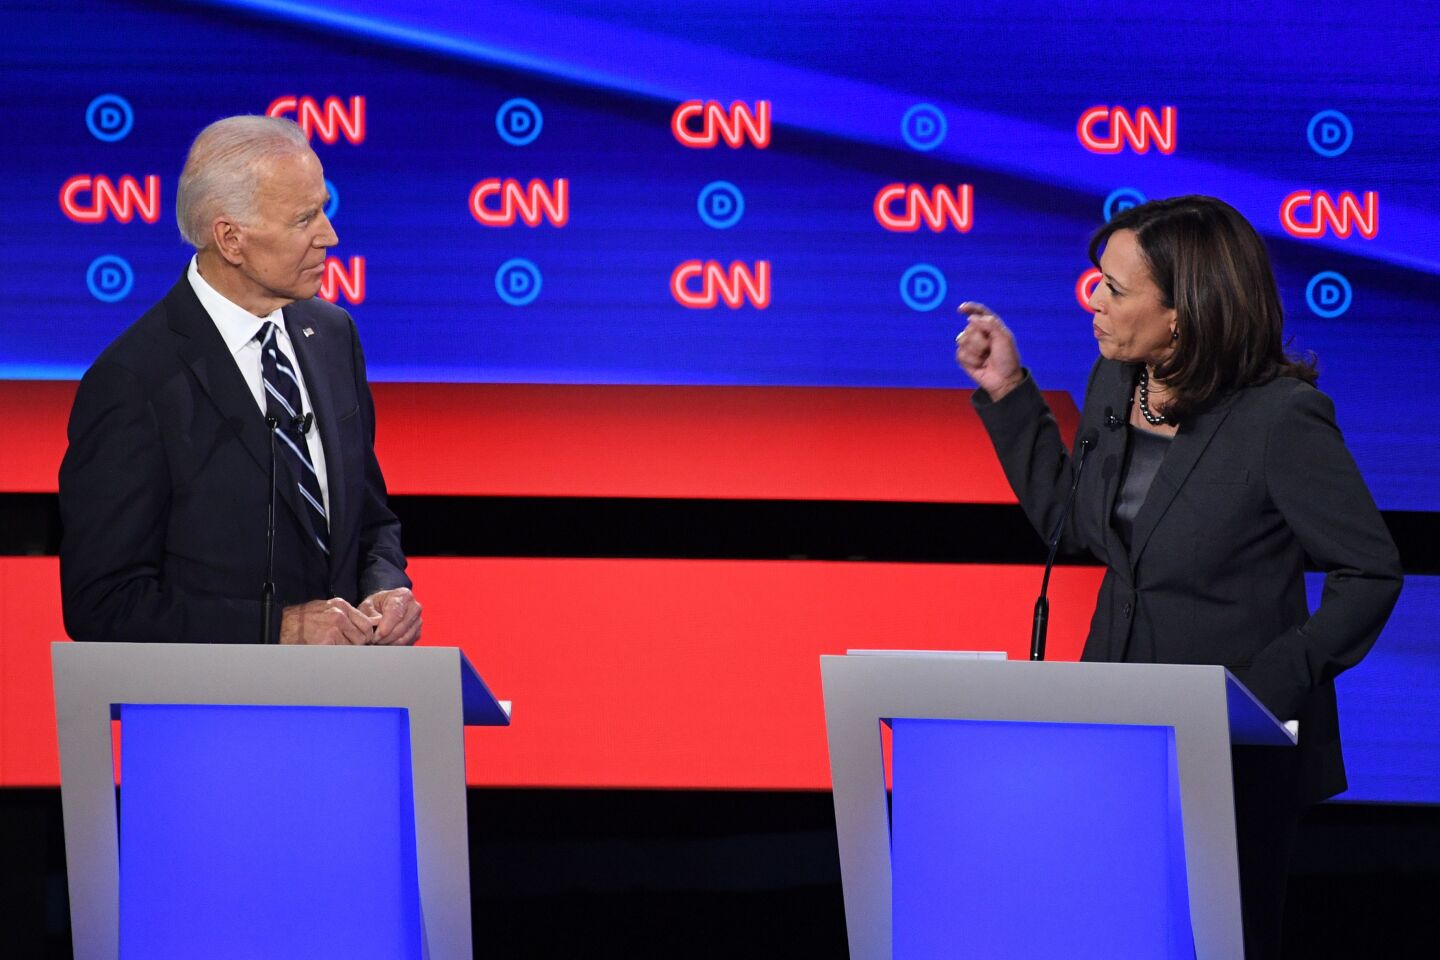 Democratic presidential hopeful Former Vice President Joe Biden (L) listens as US Senator from California Kamala Harris speaks during the second round of the second Democratic primary debate of the 2020 presidential campaign season hosted by CNN at the Fox Theatre in Detroit, Michigan on July 31, 2019. (Photo by Jim WATSON / AFP)JIM WATSON/AFP/Getty Images ** OUTS - ELSENT, FPG, CM - OUTS * NM, PH, VA if sourced by CT, LA or MoD **